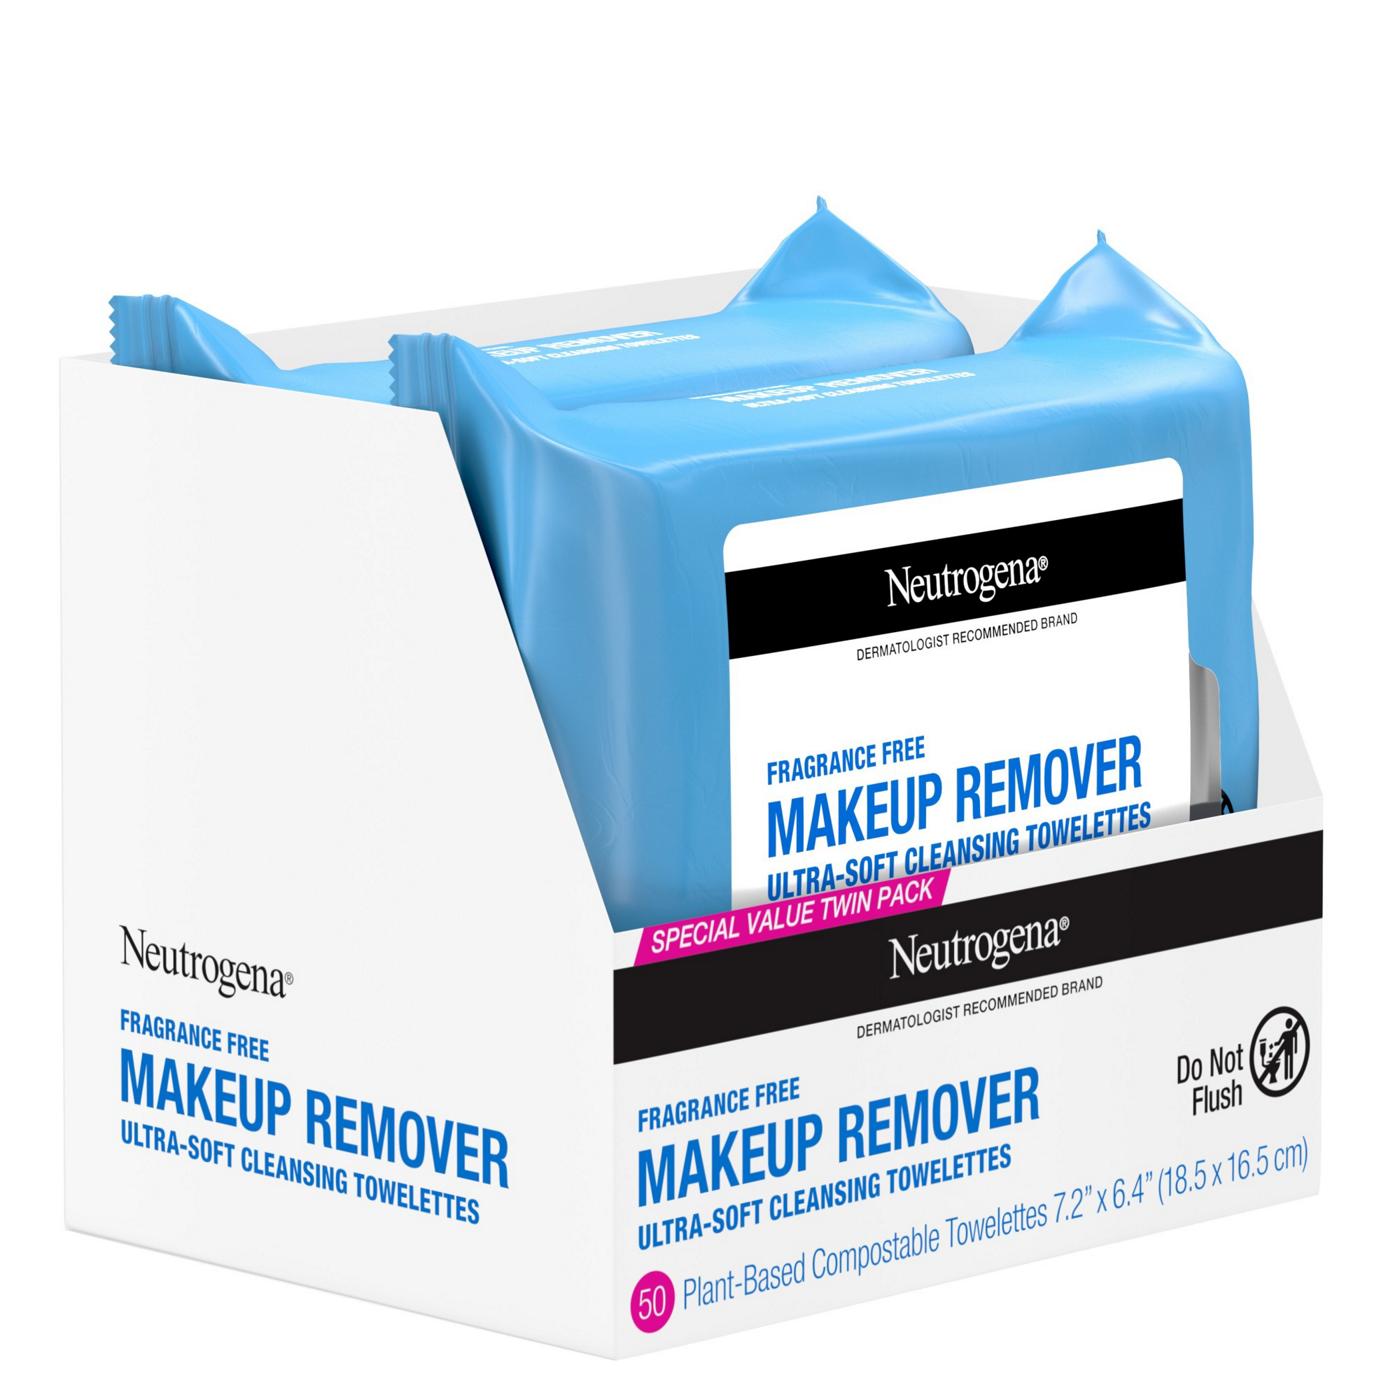 Neutrogena Makeup Remover Fragrance Free Cleansing Towelettes - Twin Pack; image 5 of 8